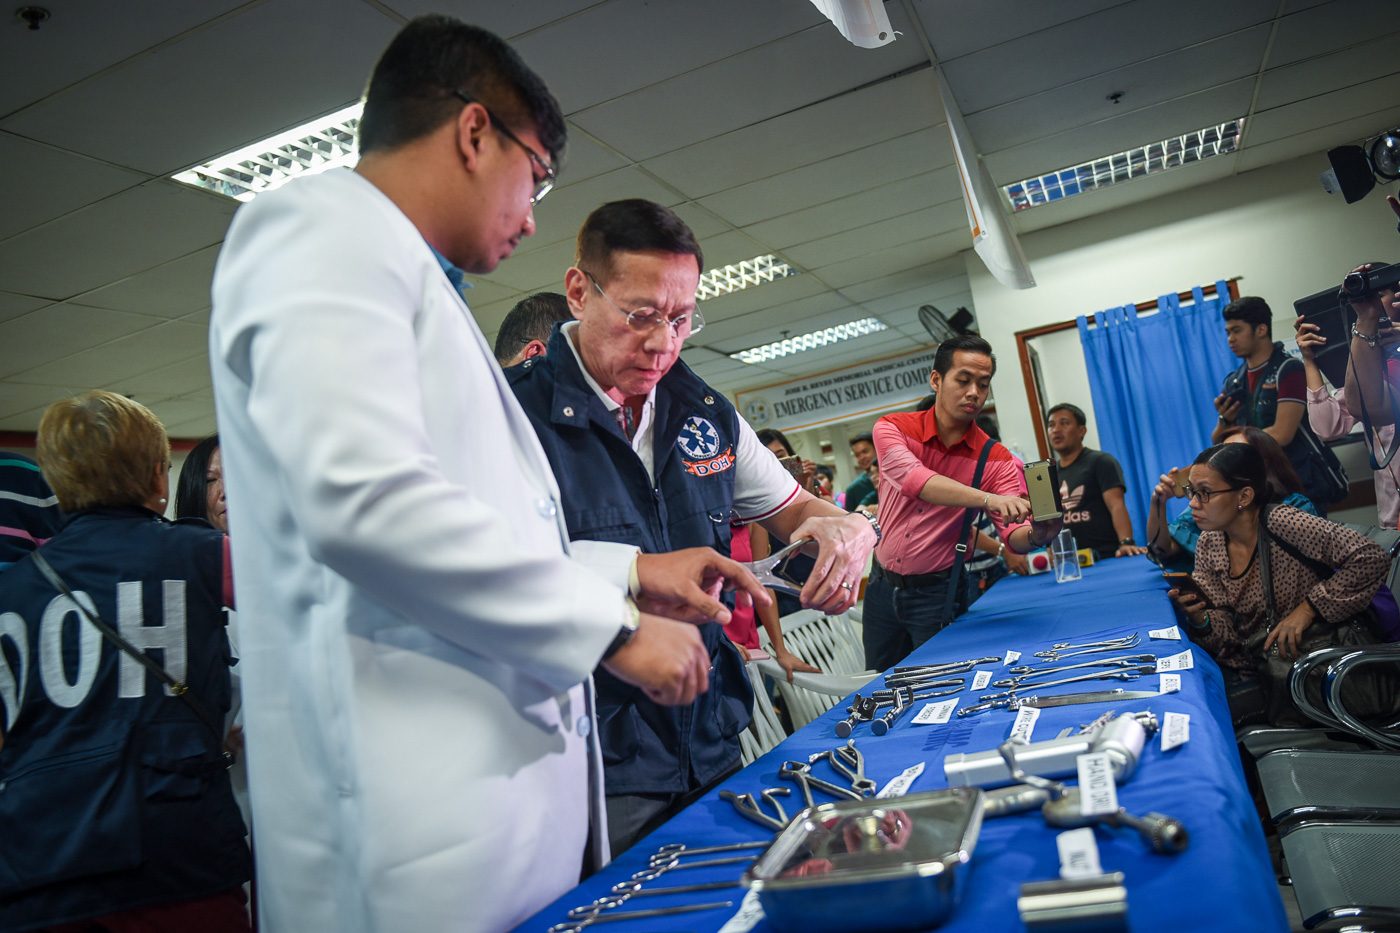 DOH tallies 46 injured by fireworks as of December 30